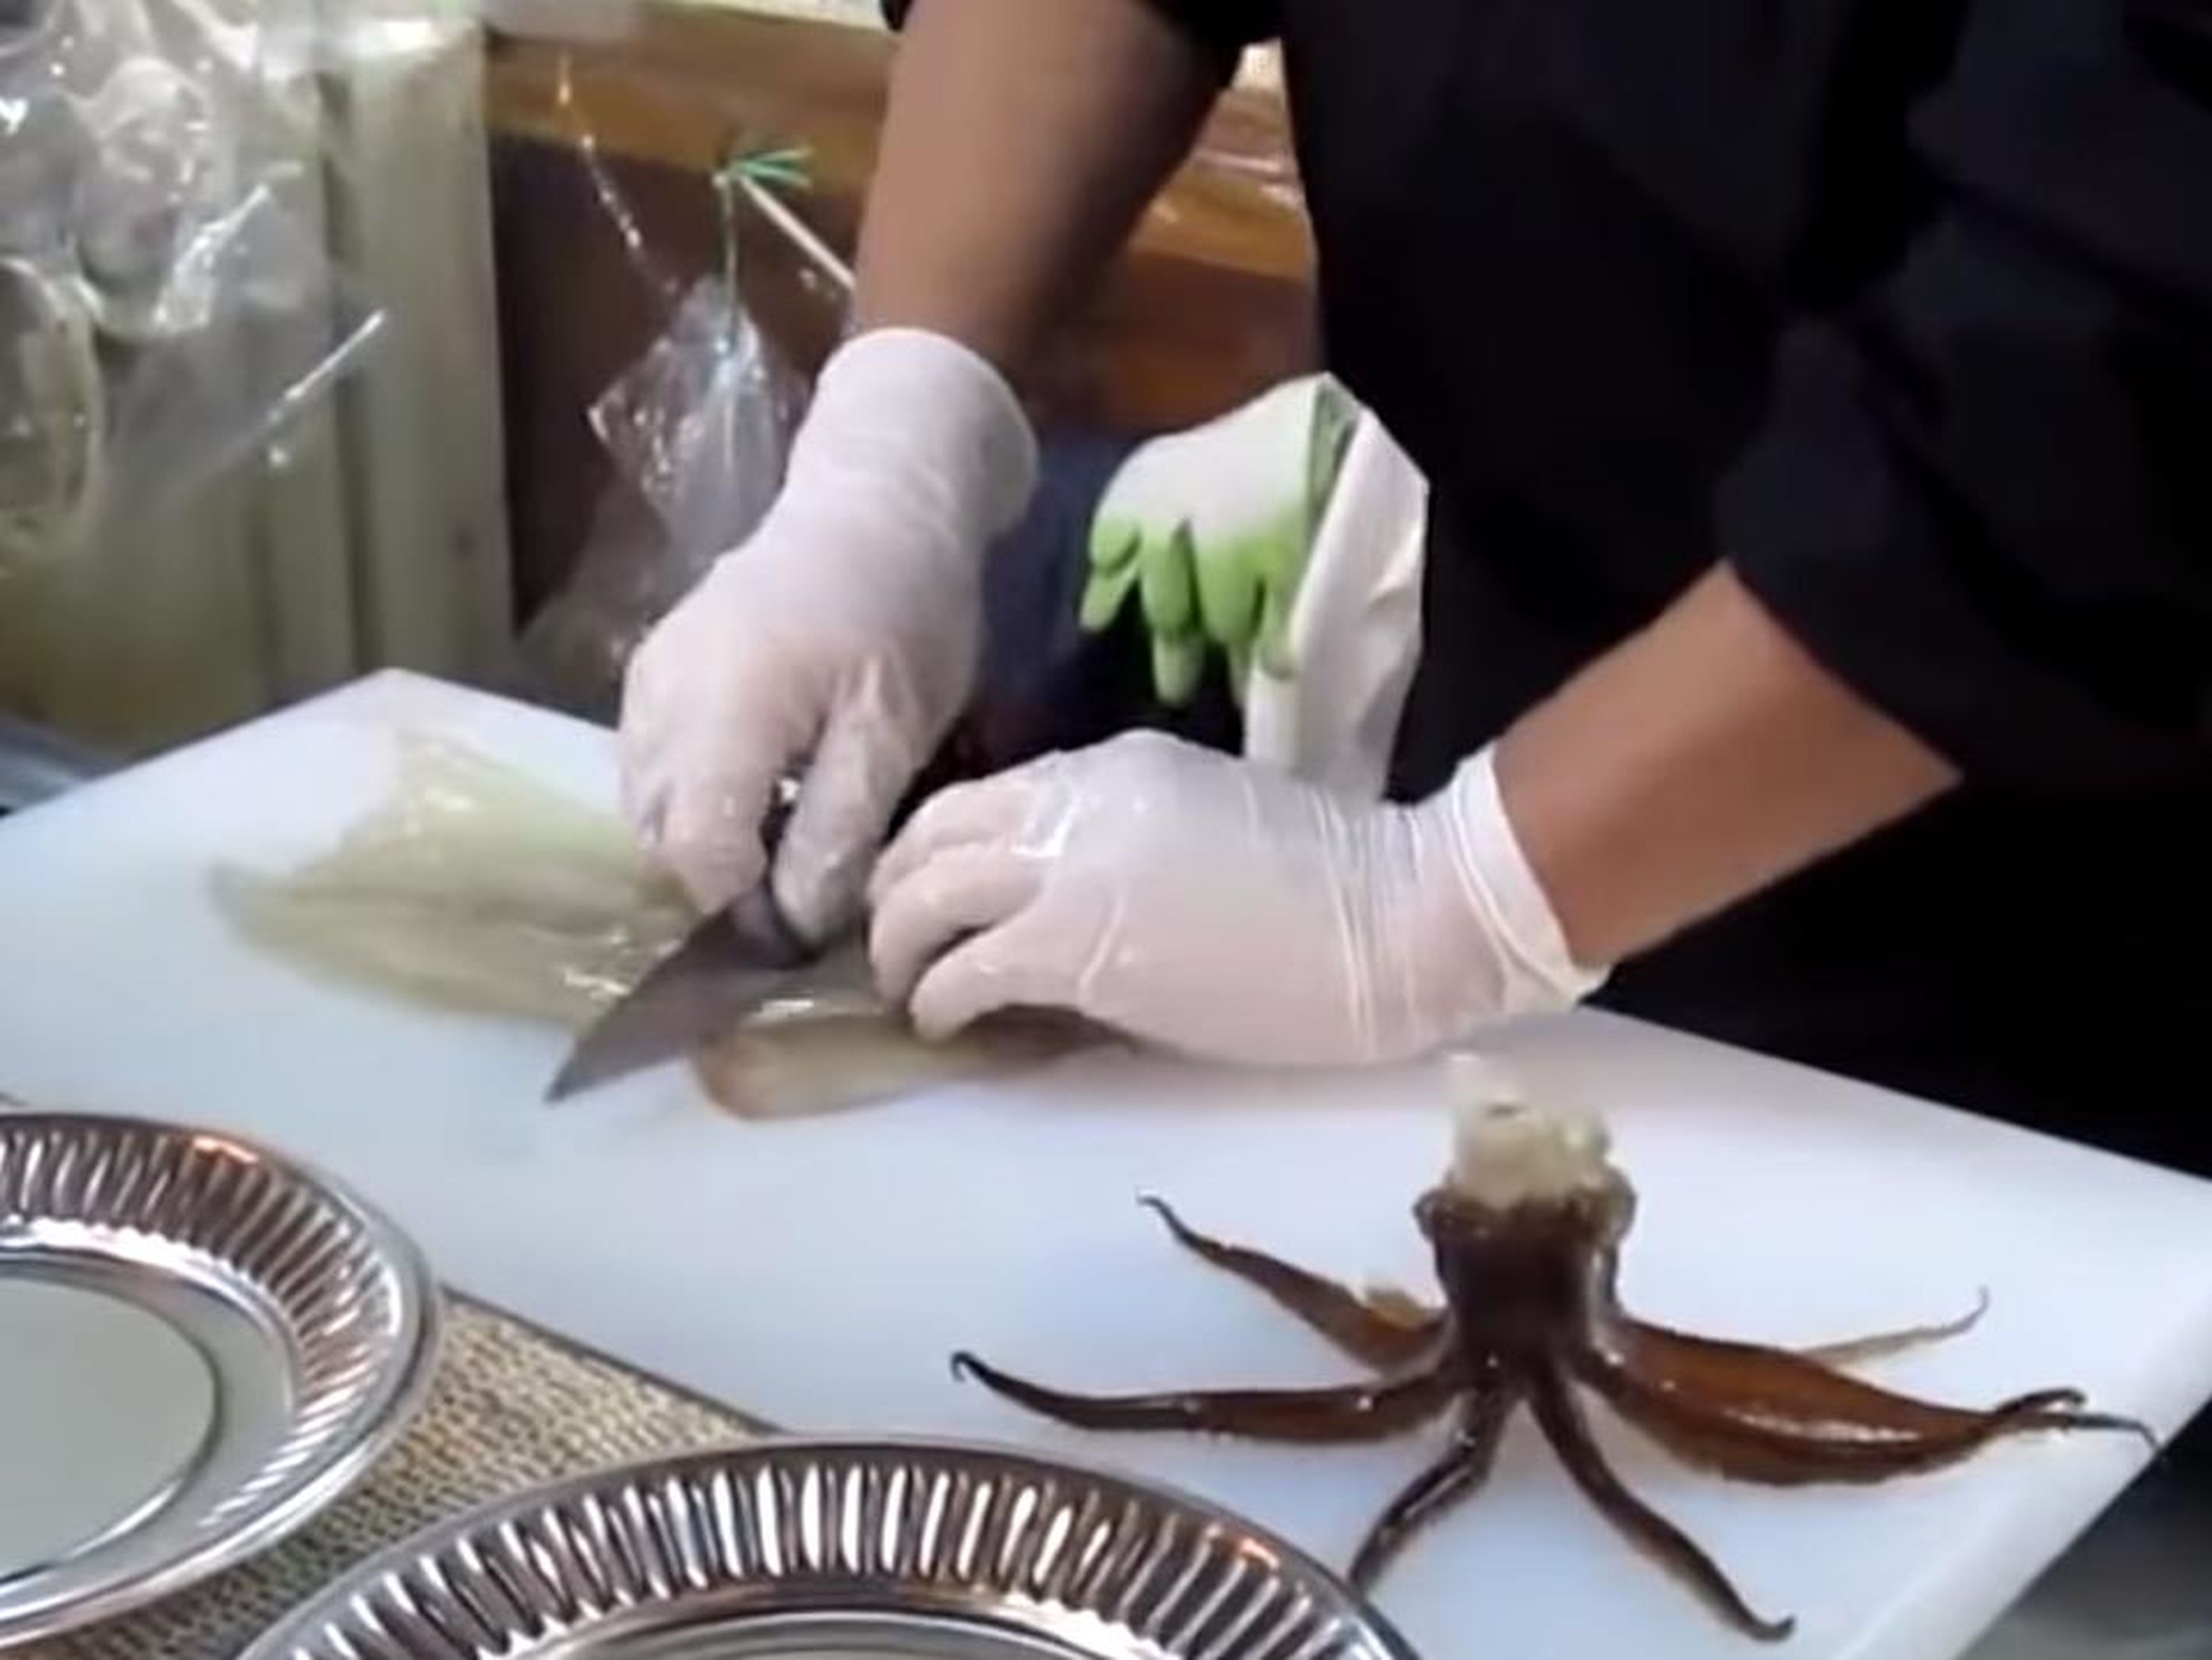 While it may seem pretty cruel to eat a still-moving animal, the fish isn't technically alive — the chef removes its brain during the preparation process.